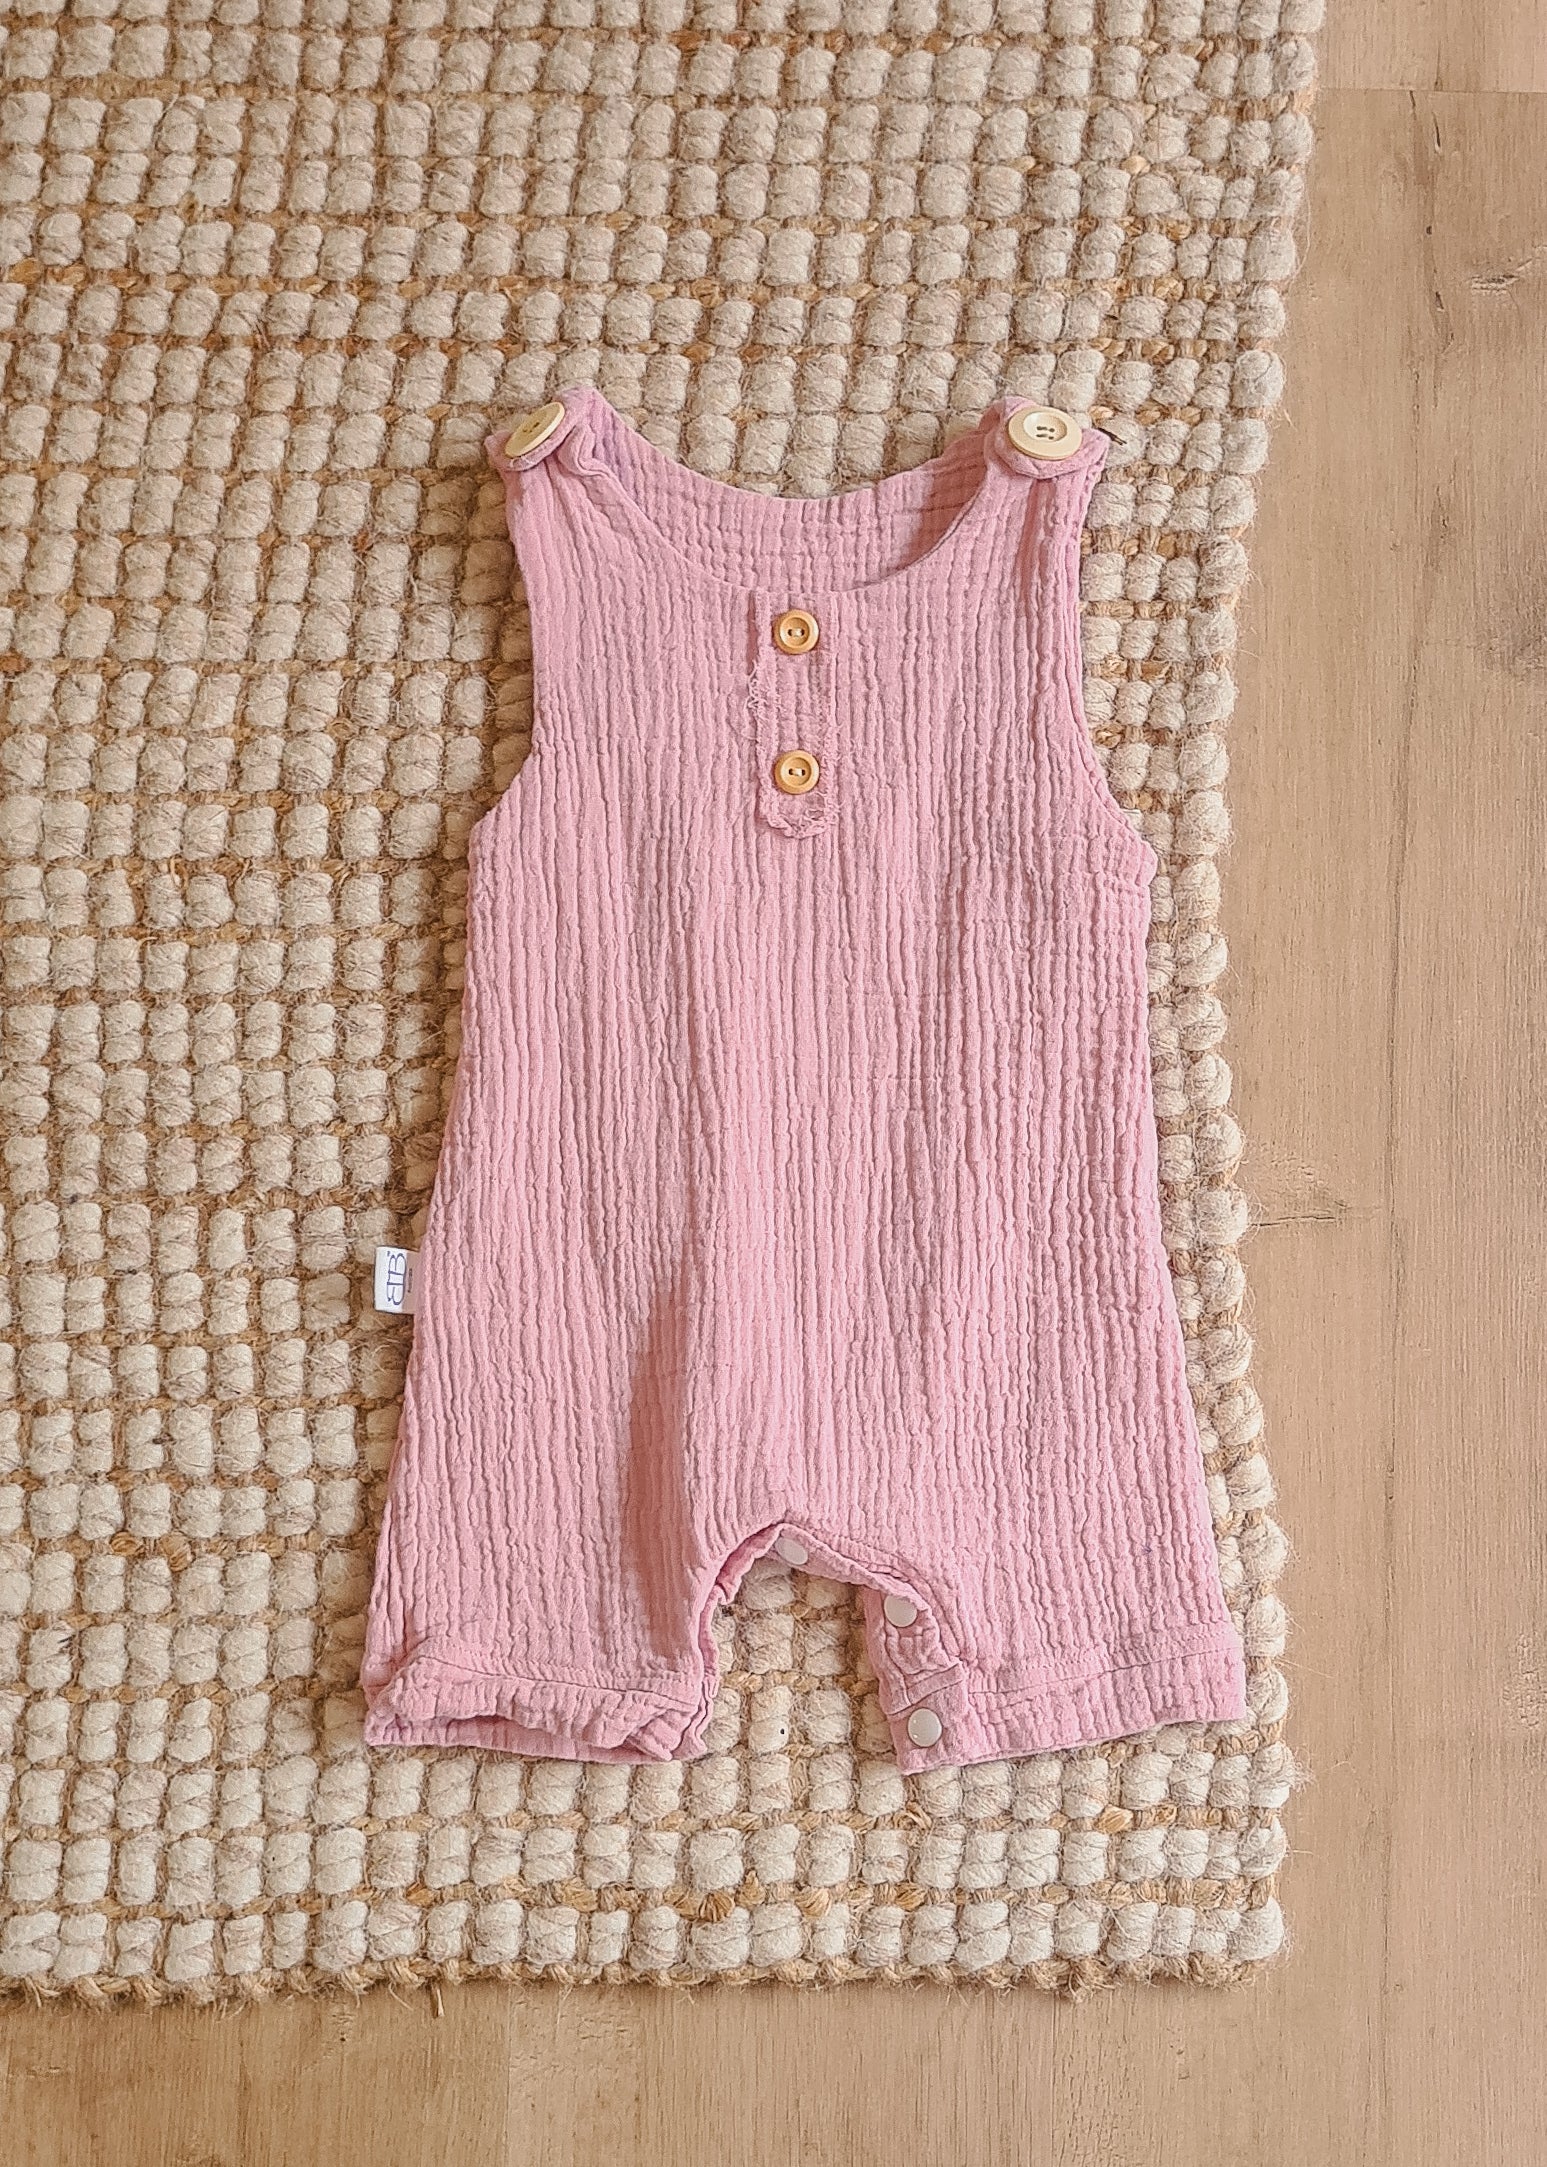 Organic cotton baby romper pink overalls